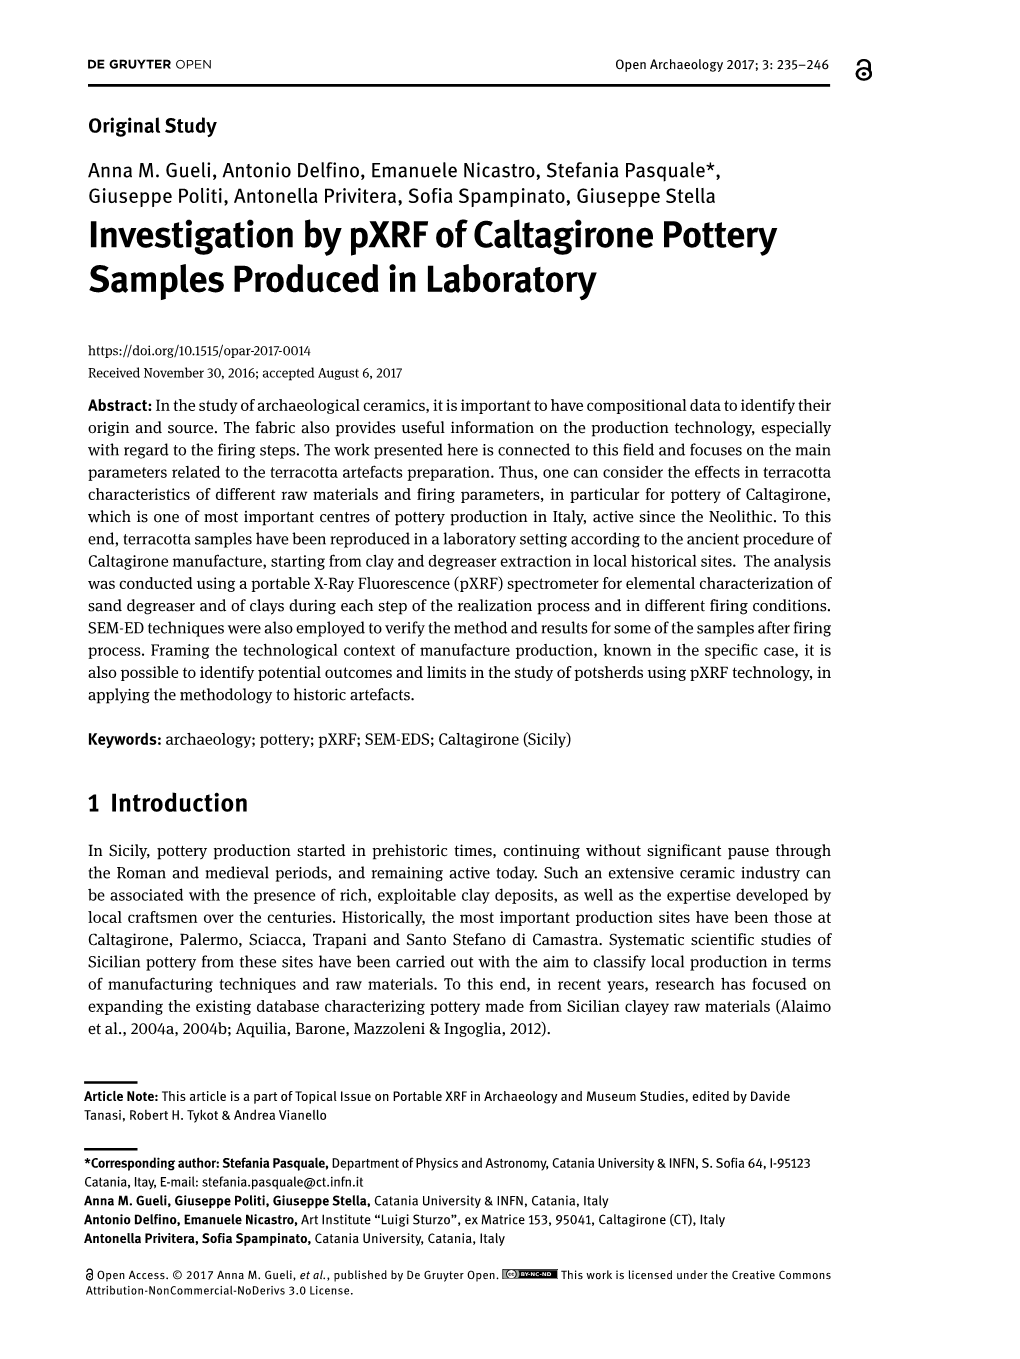 Investigation by Pxrf of Caltagirone Pottery Samples Produced in Laboratory Received November 30, 2016; Accepted August 6, 2017